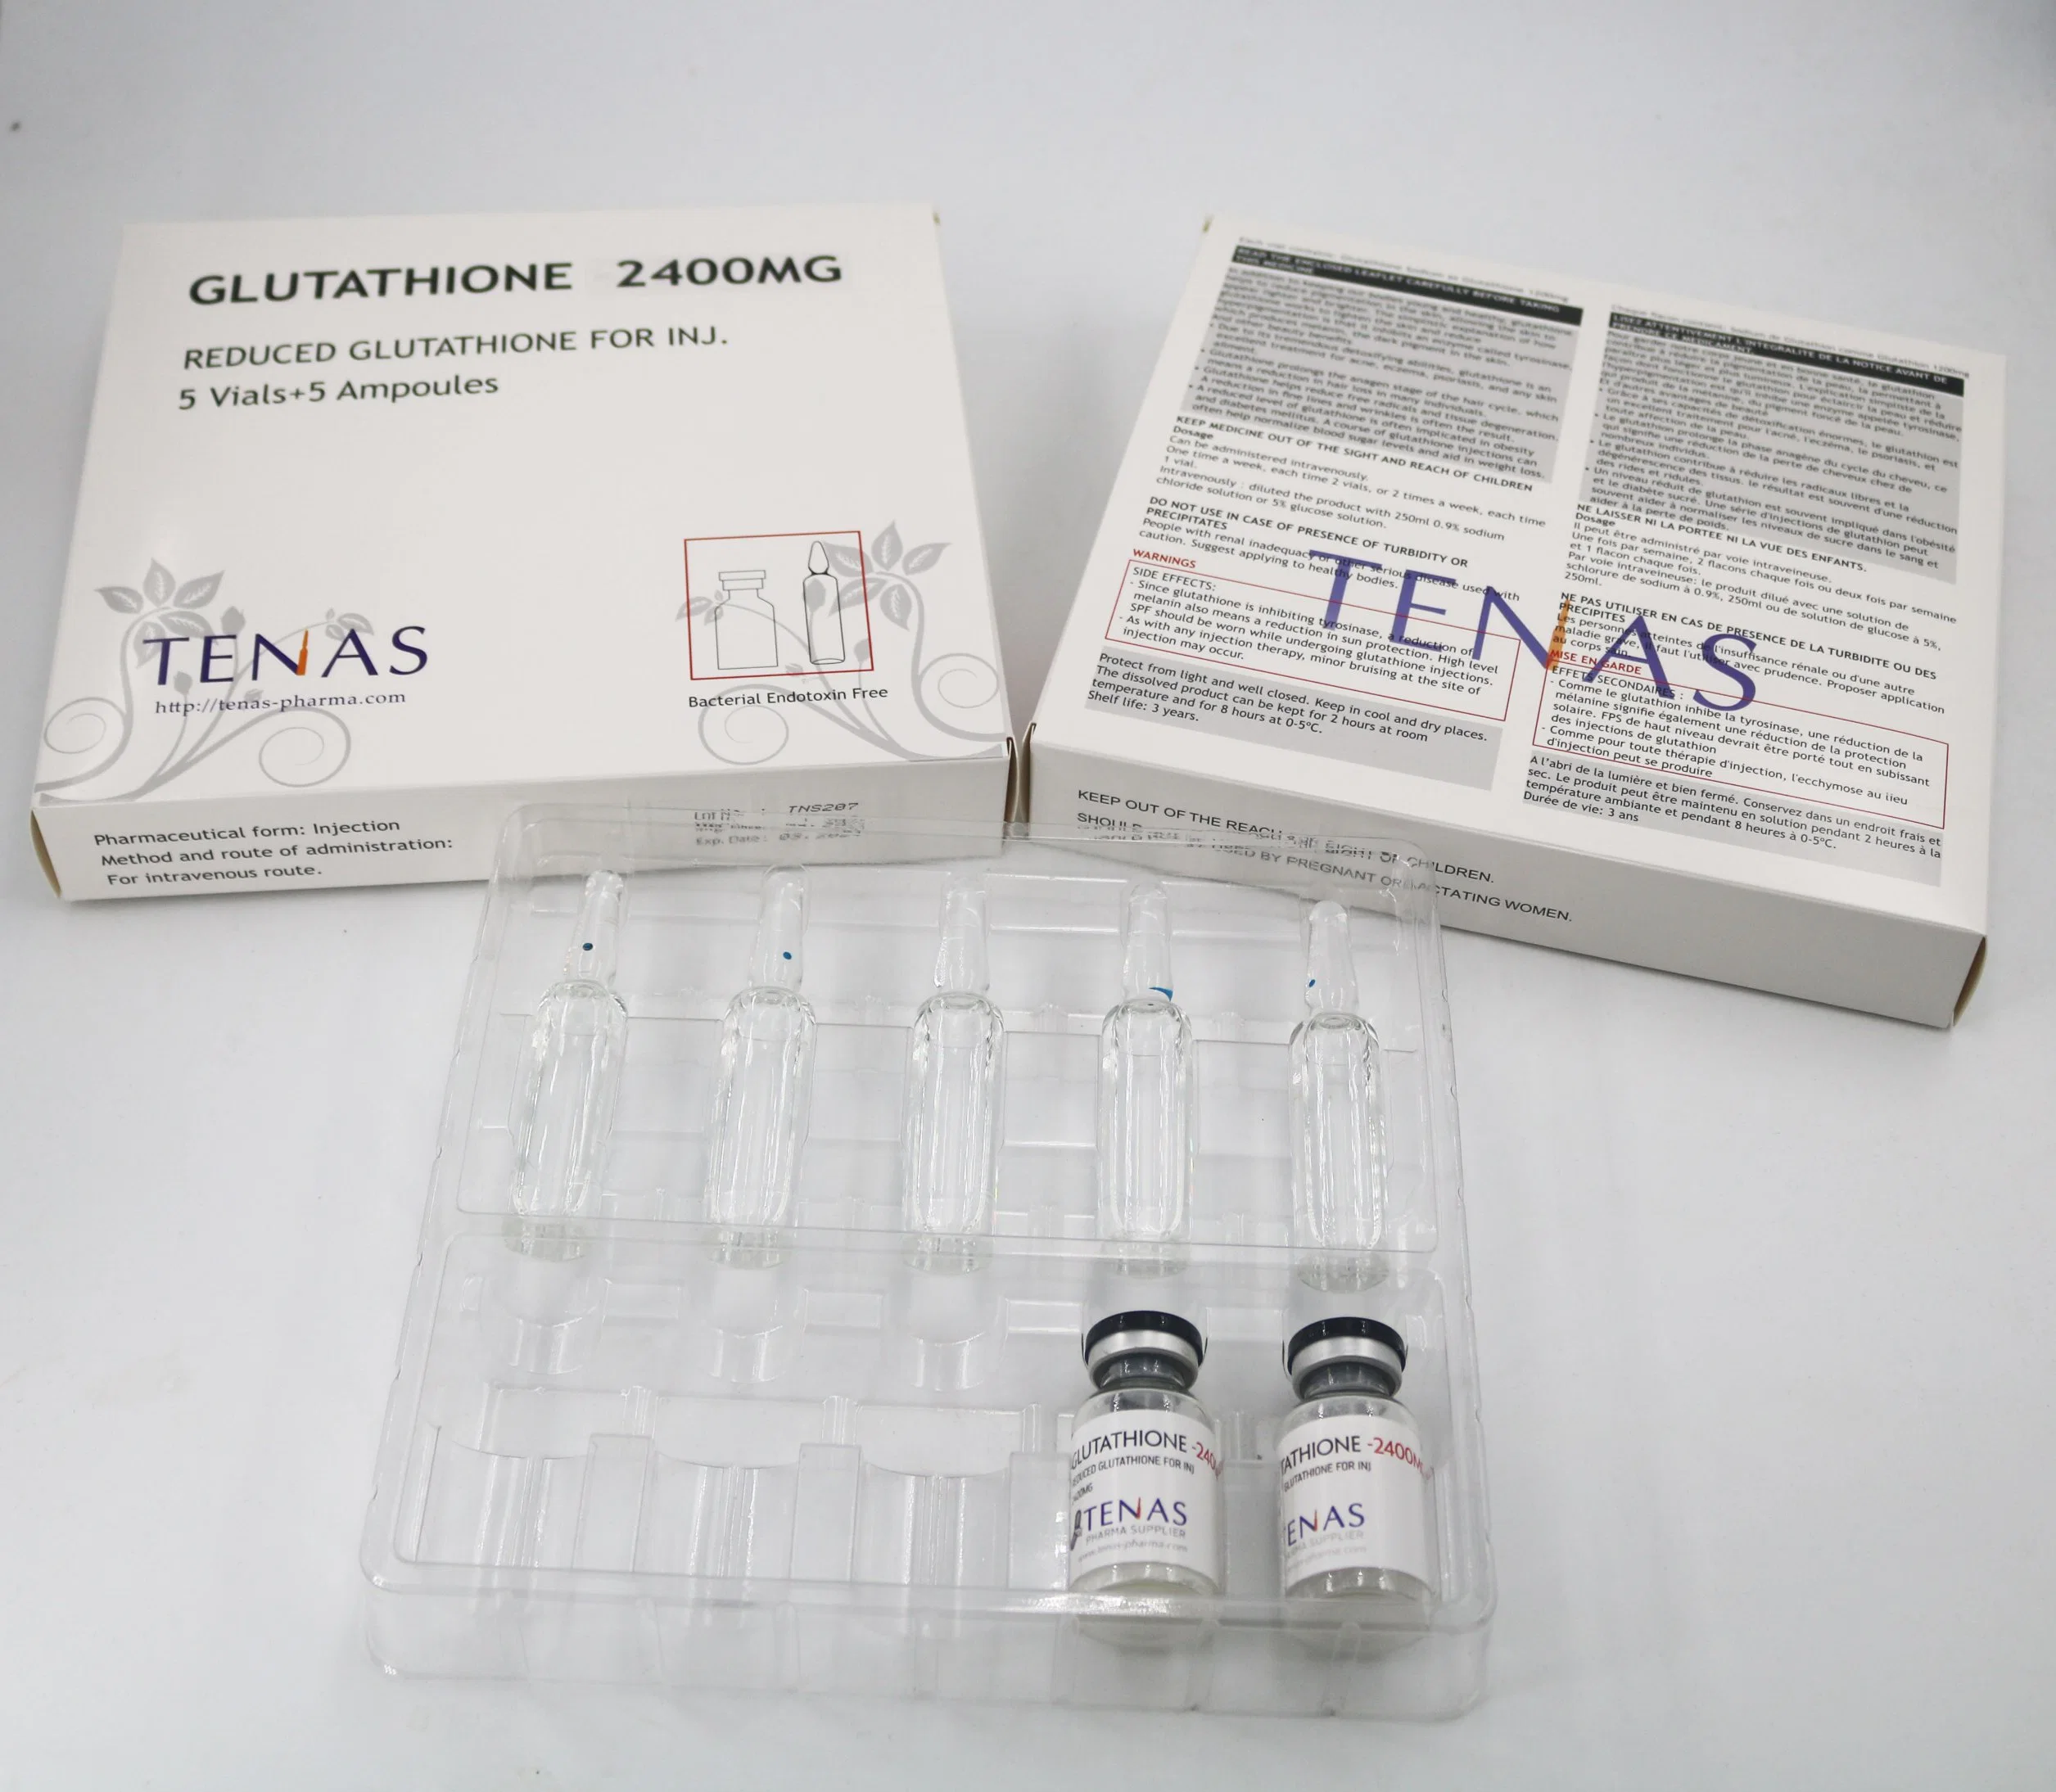 Skin Care Product Injectable Reduced Glutathione 2400mg IV Use